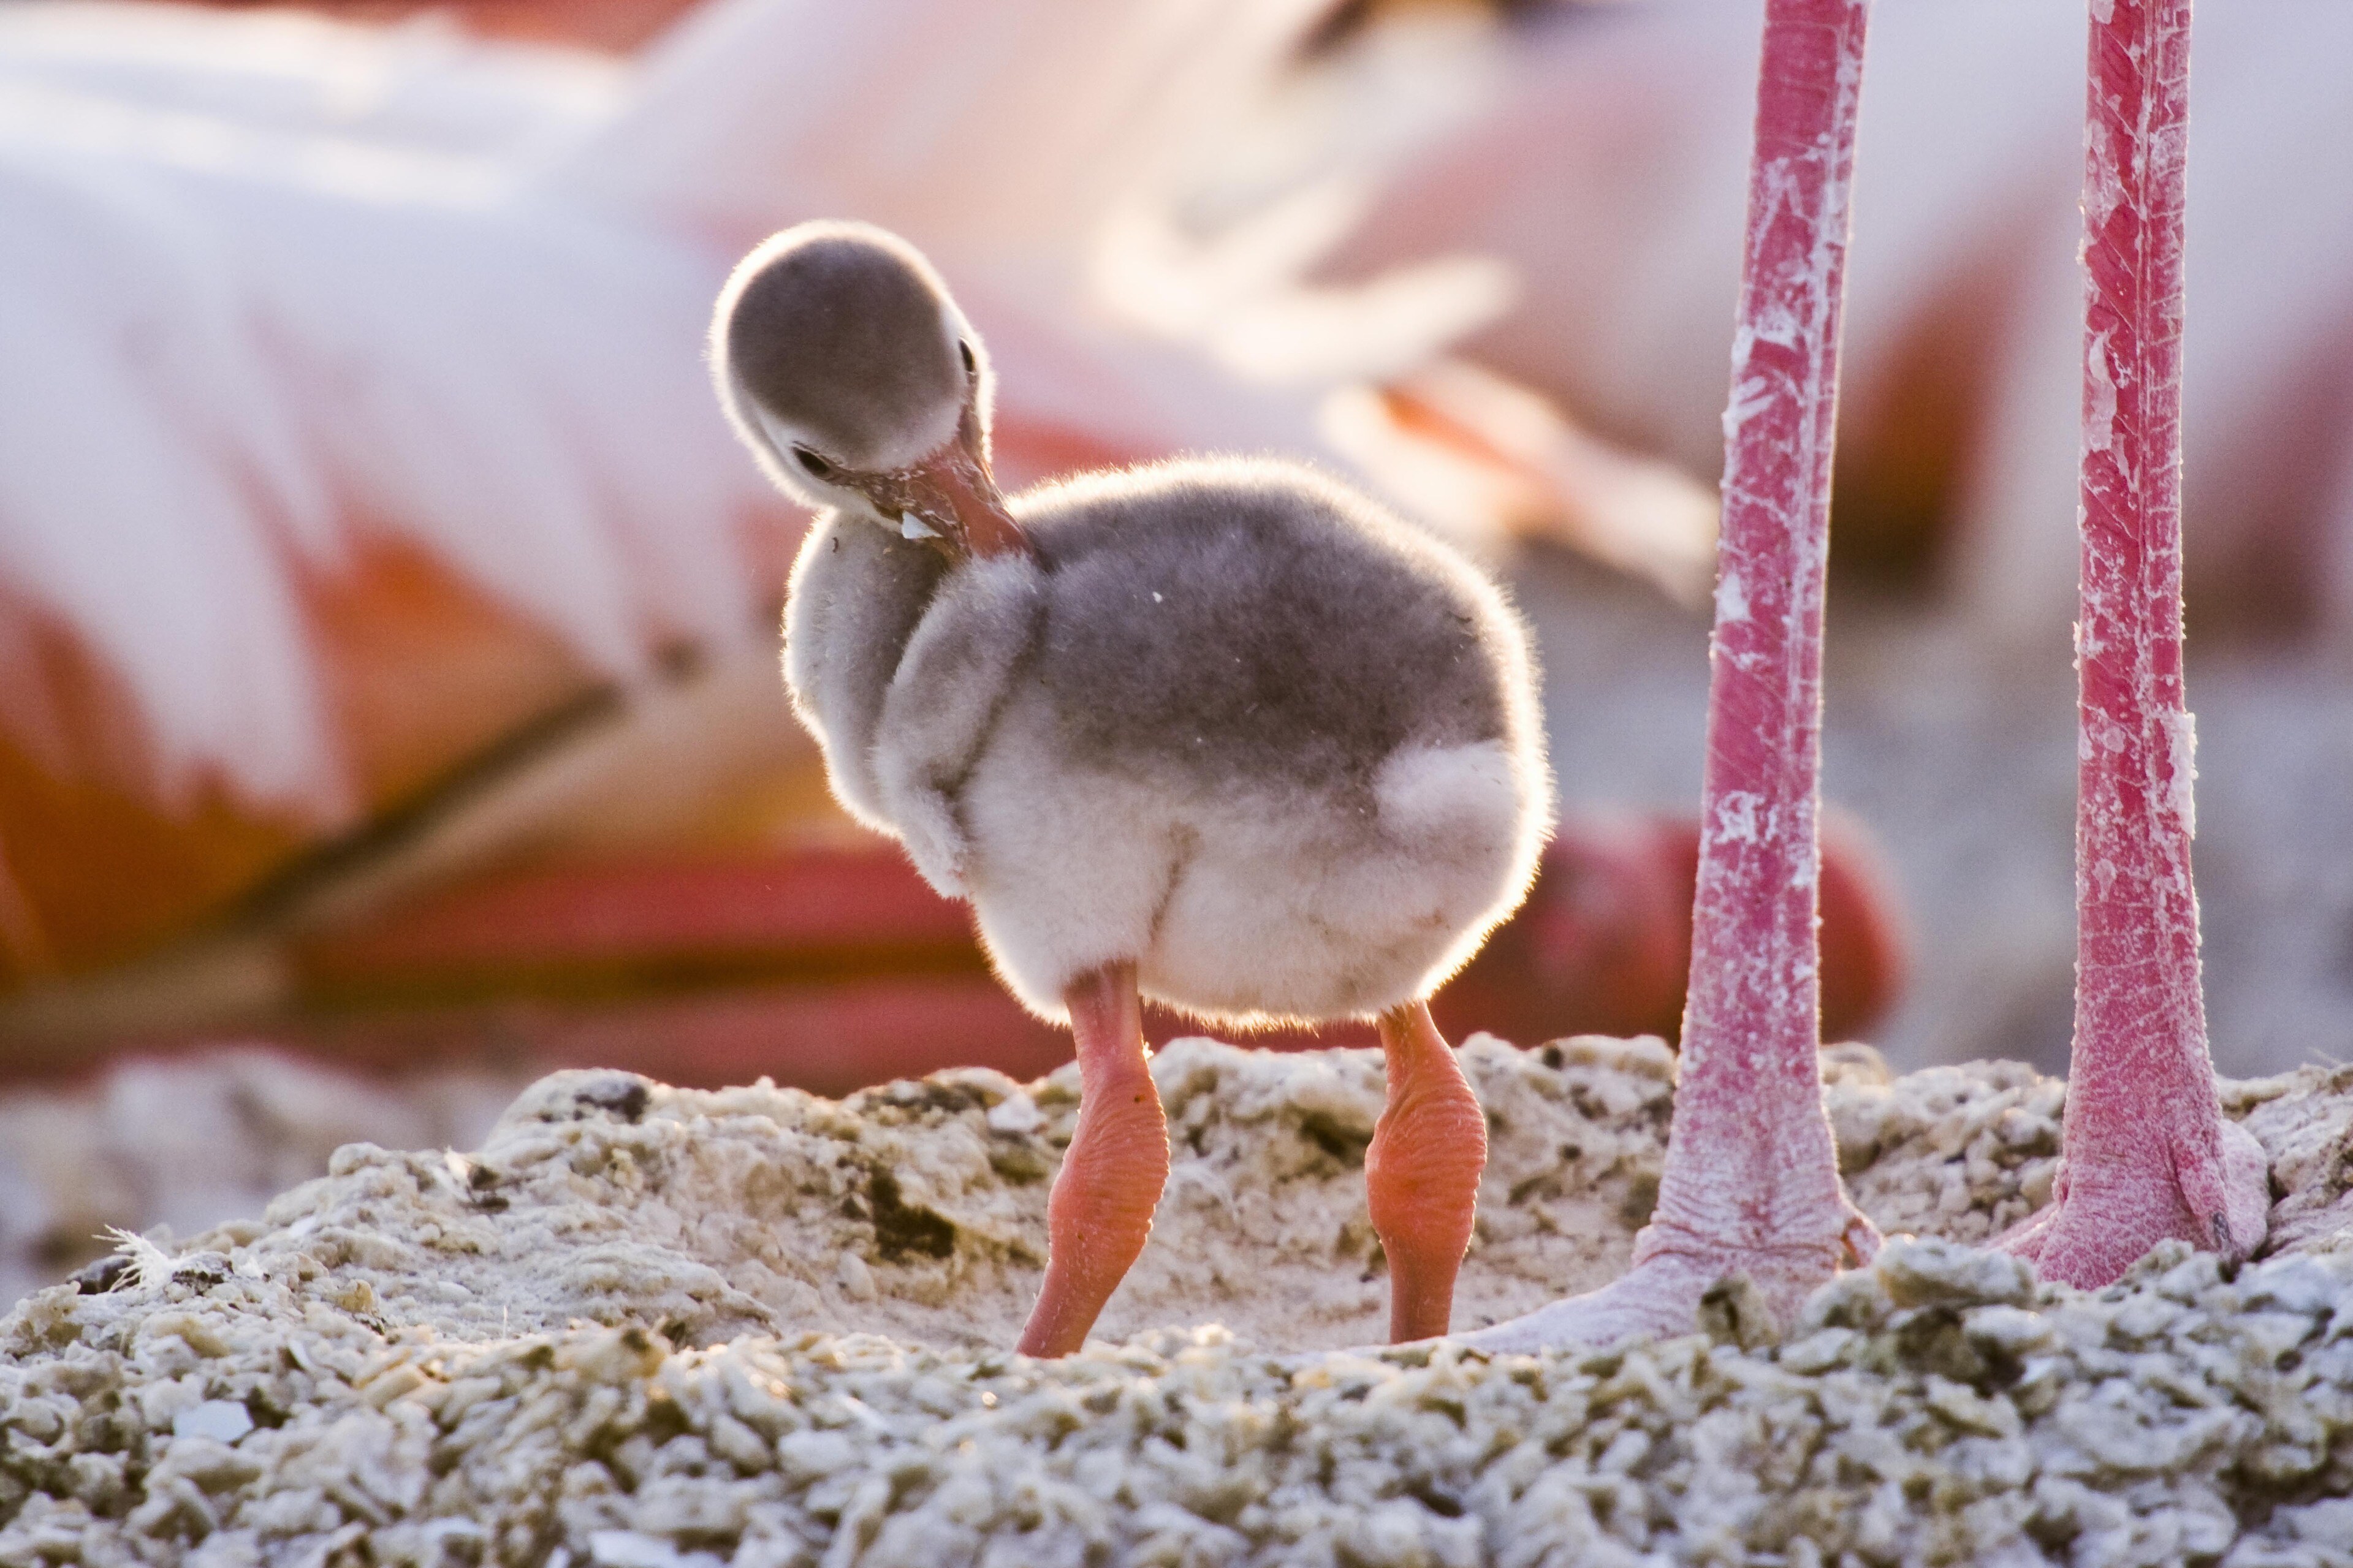 A young flamingo learning to walk.